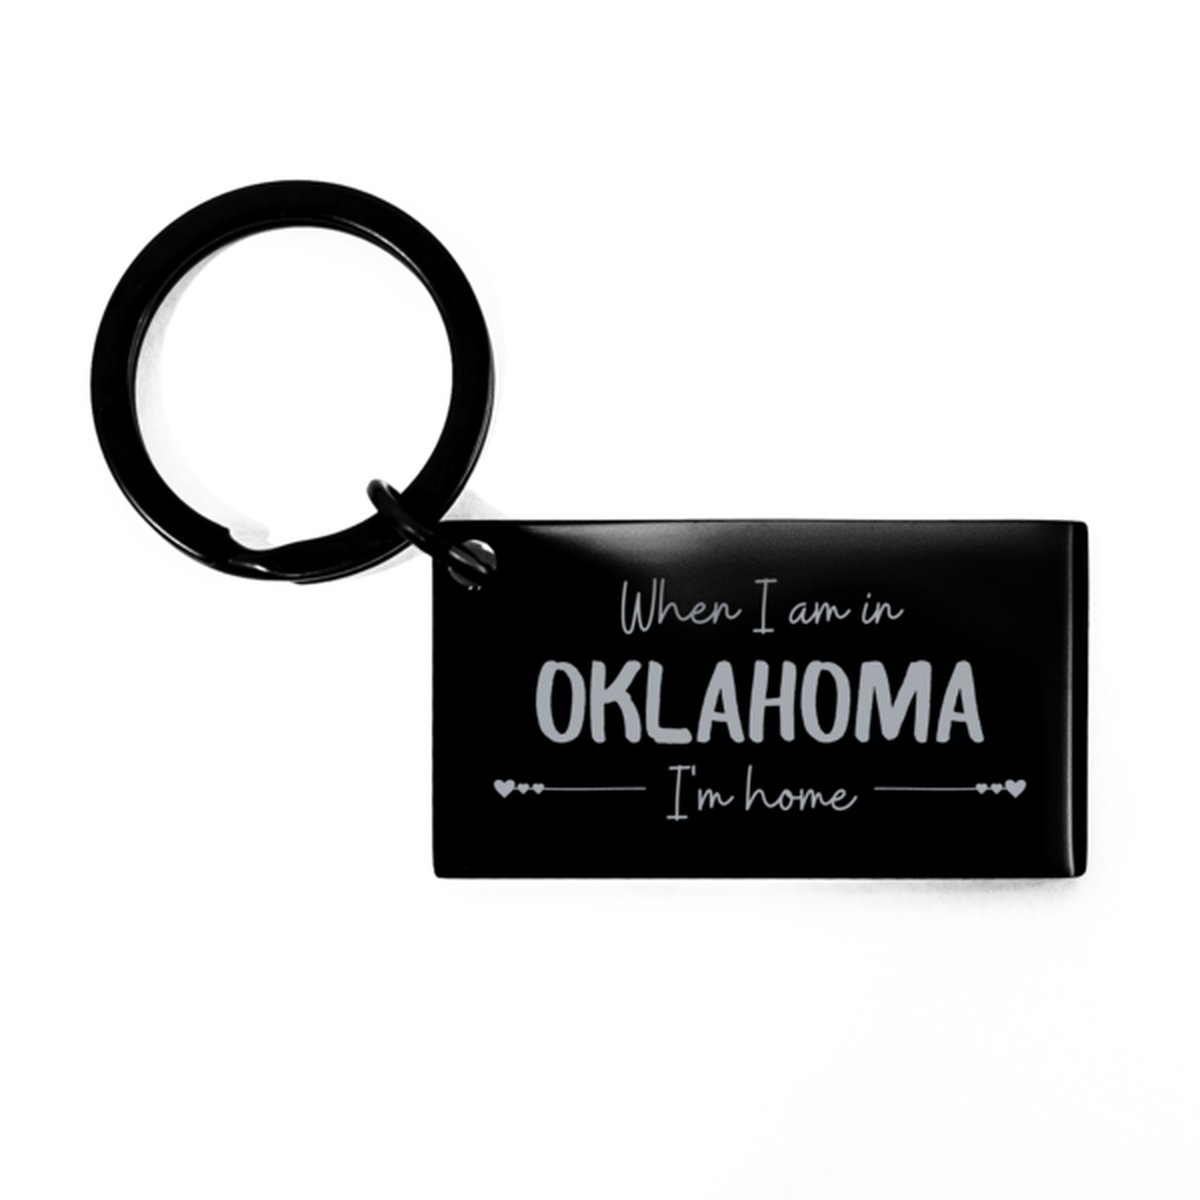 When I am in Oklahoma I'm home Keychain, Cheap Gifts For Oklahoma, State Oklahoma Birthday Gifts for Friends Coworker